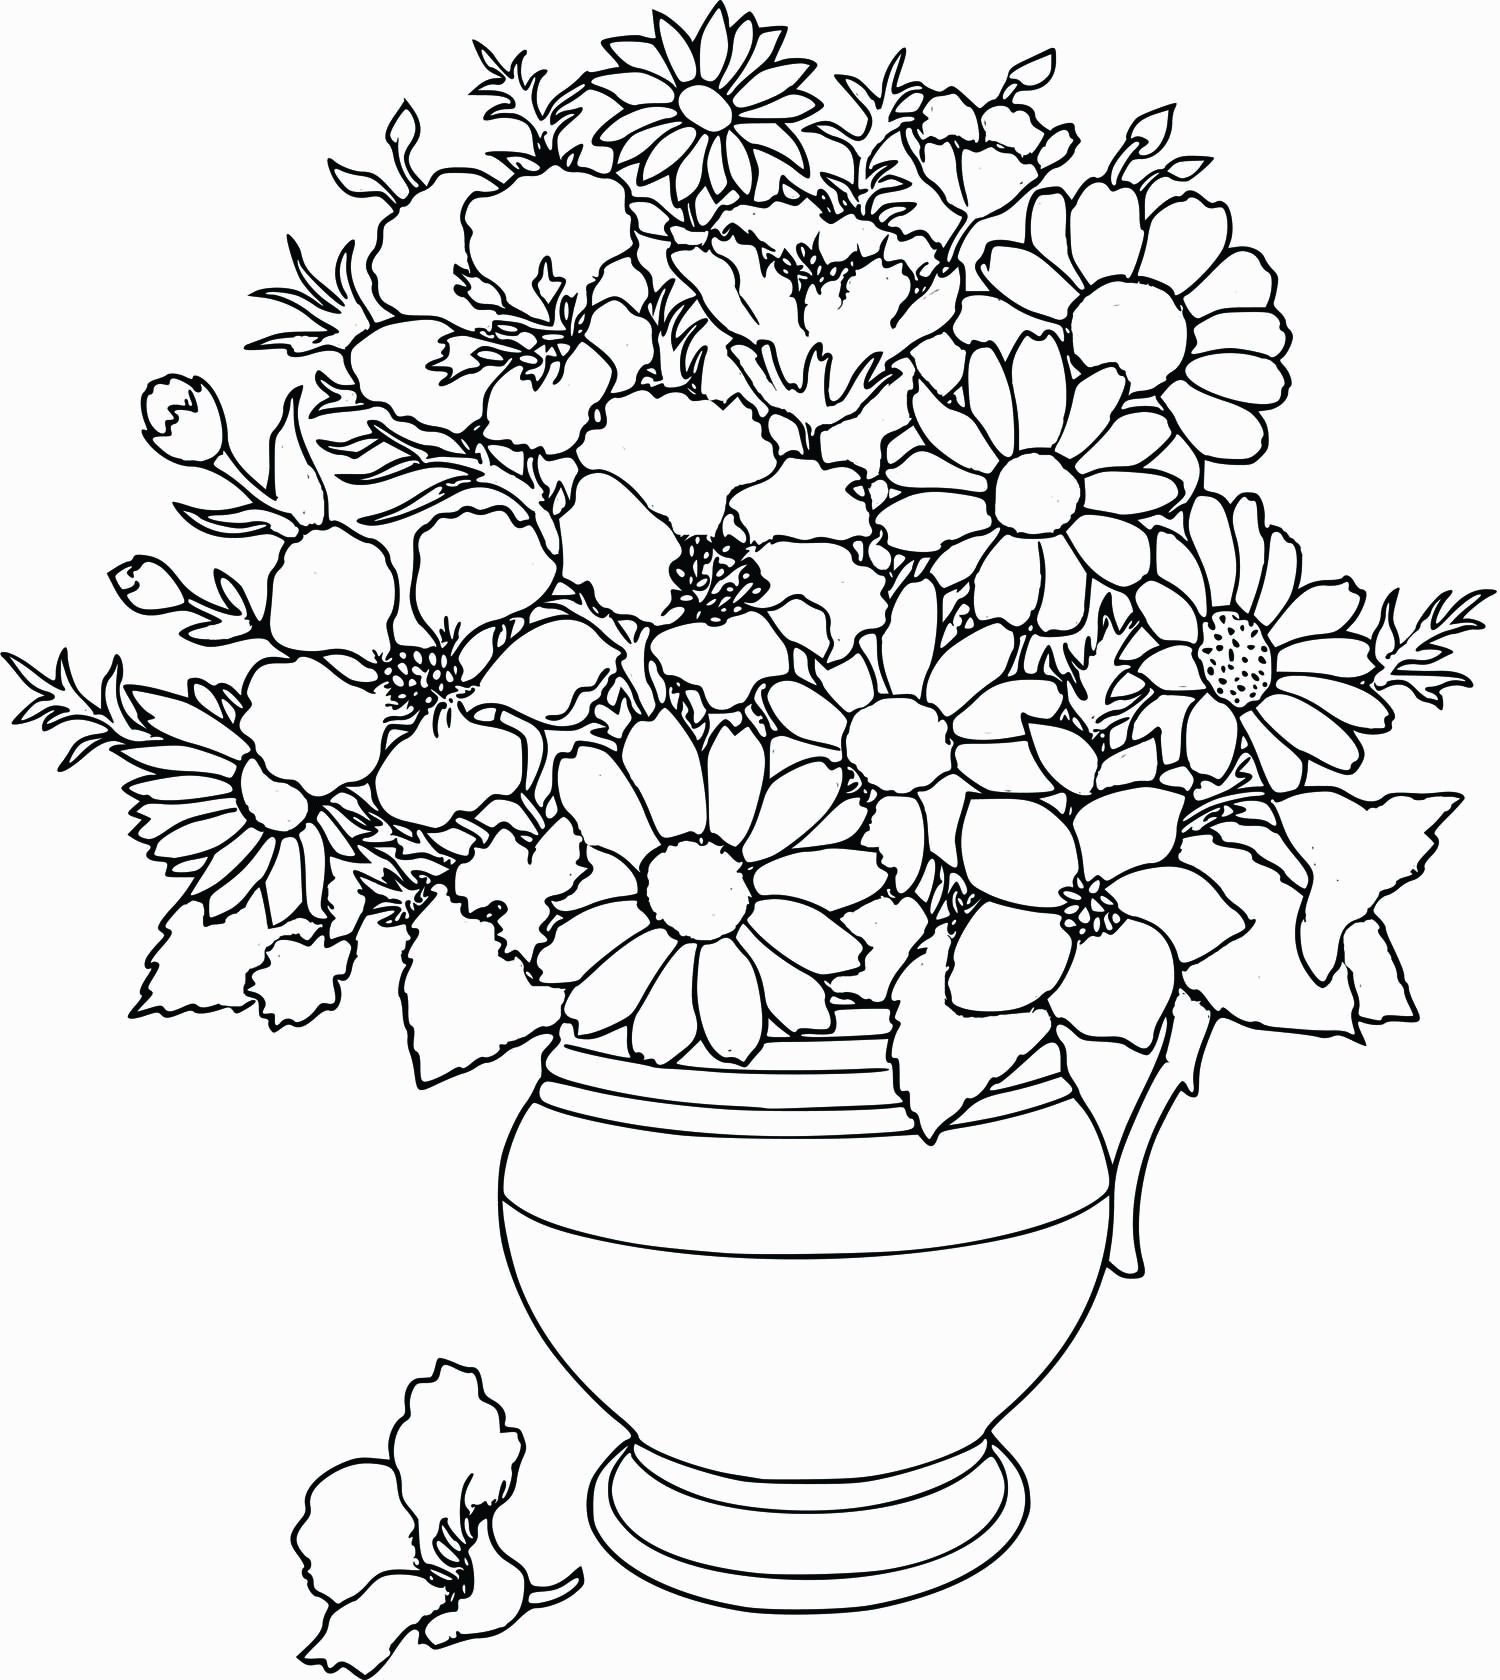 Fire Flower Coloring Pages - Coloring Home